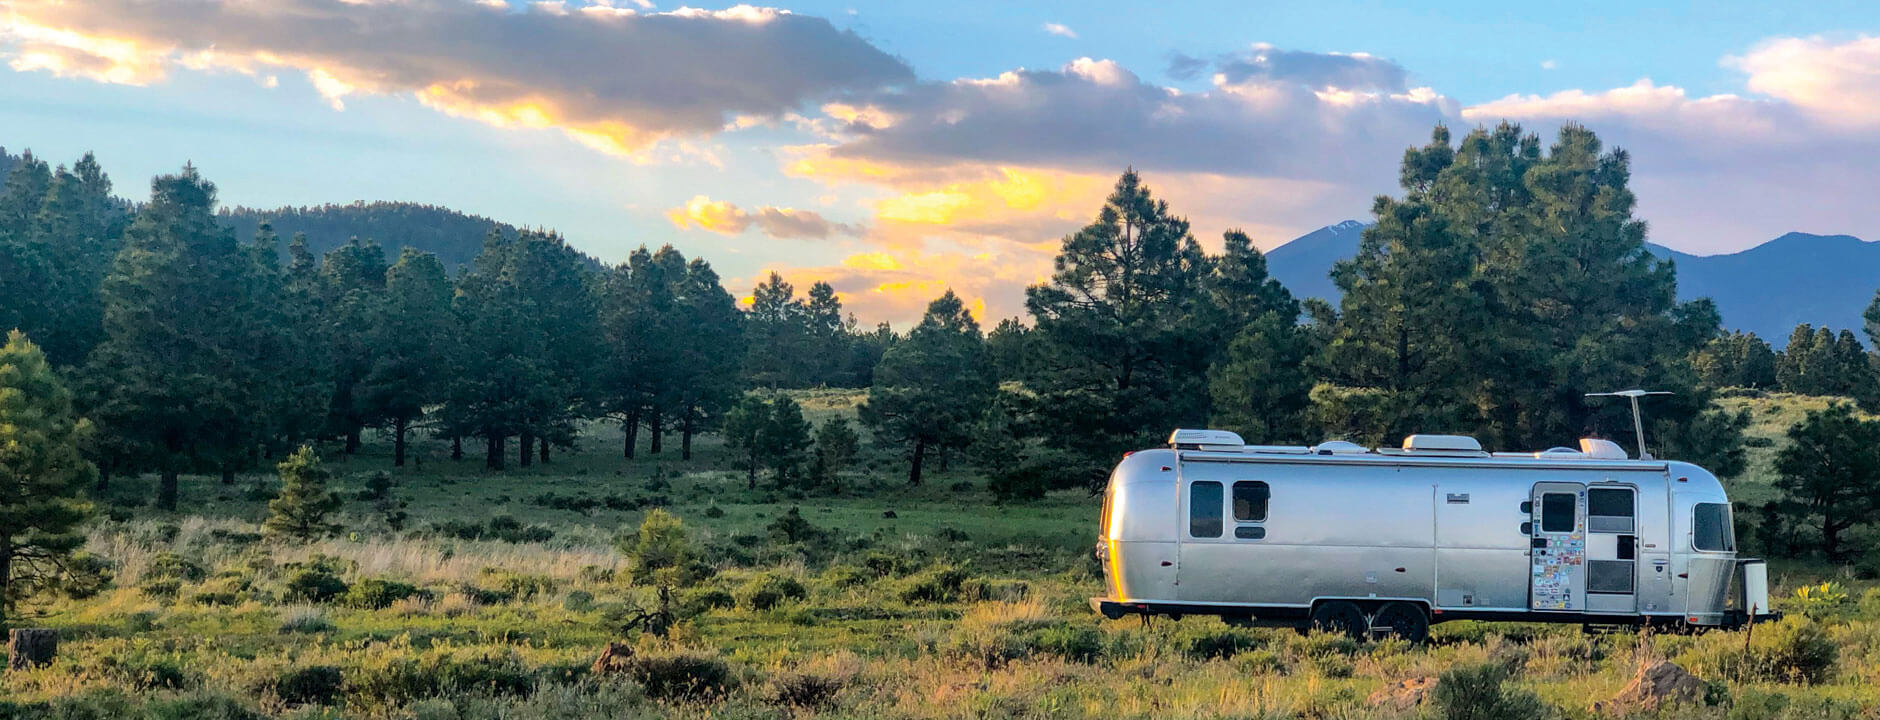 Airstream camping in the mountains with sunset